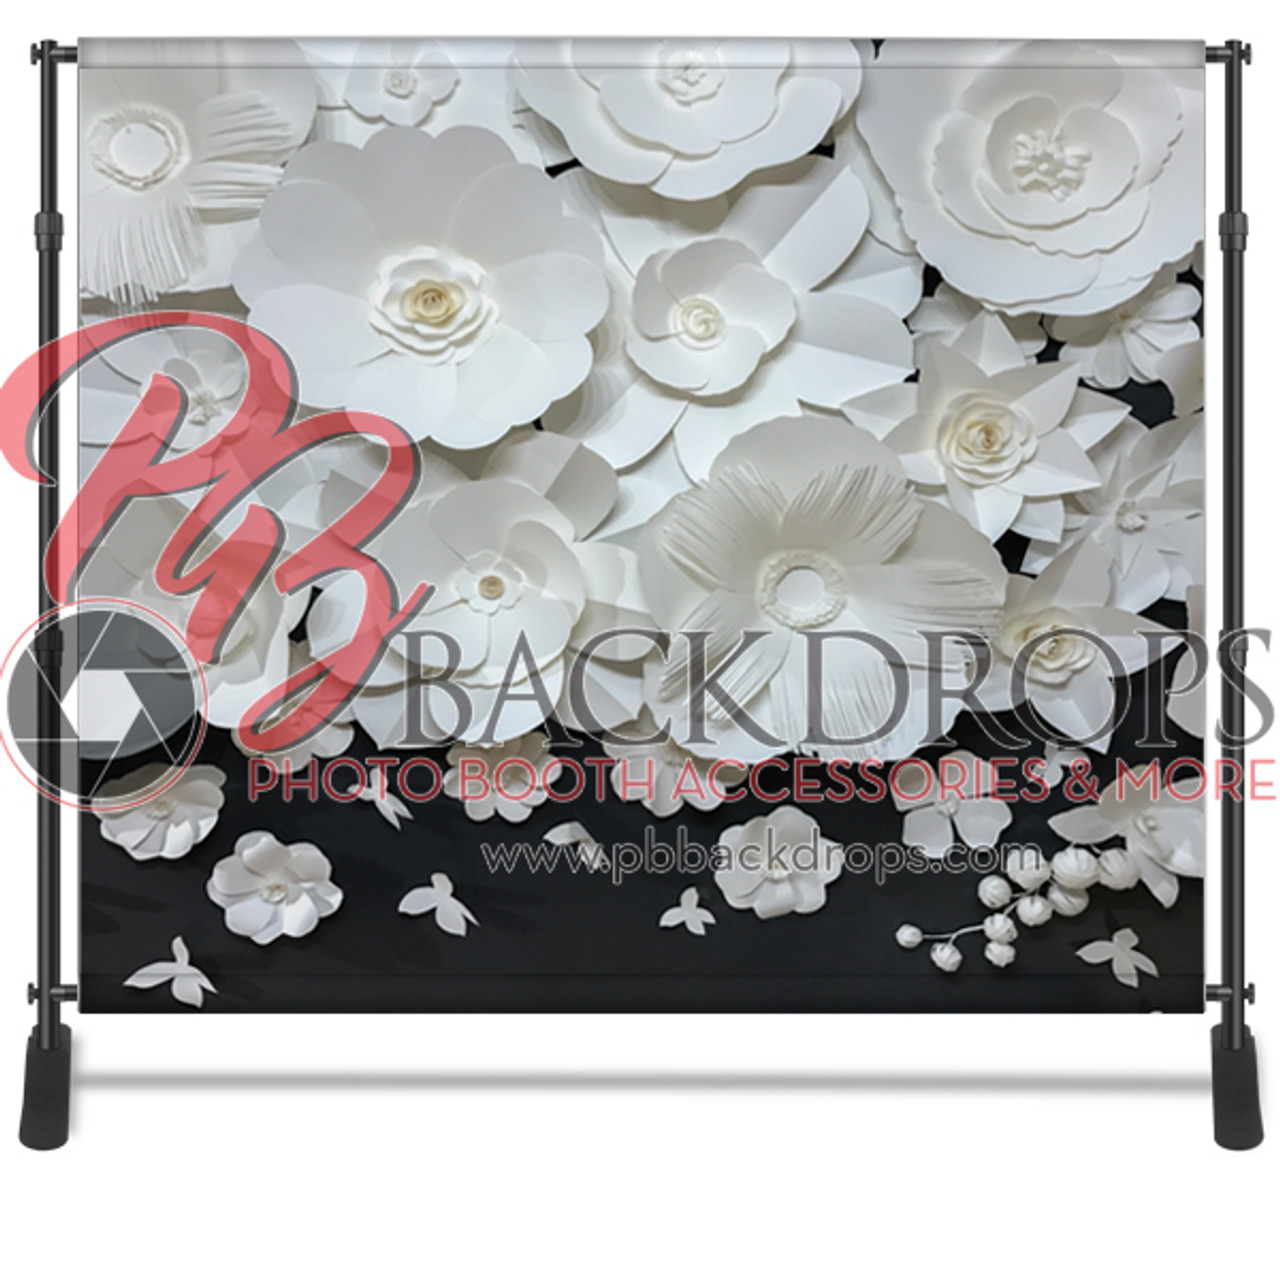 8x8 Printed Tension fabric backdrop (large paper flowers) - PB Backdrops